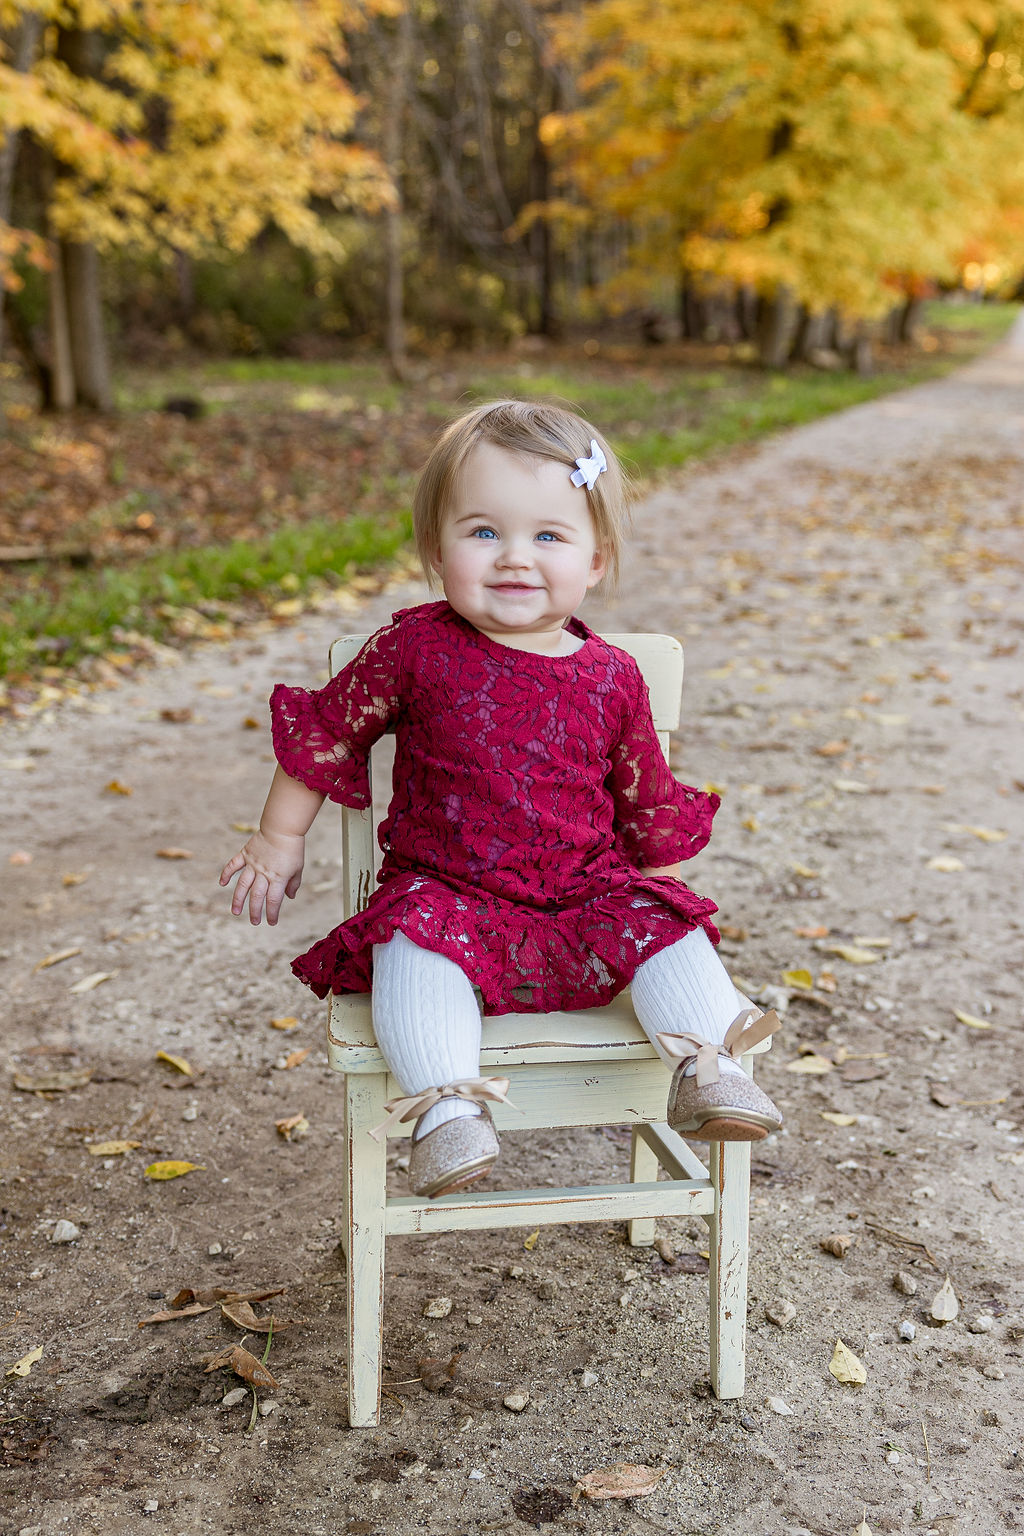 A toddler girl in a pink dress sits on a wooden chair in a park trail